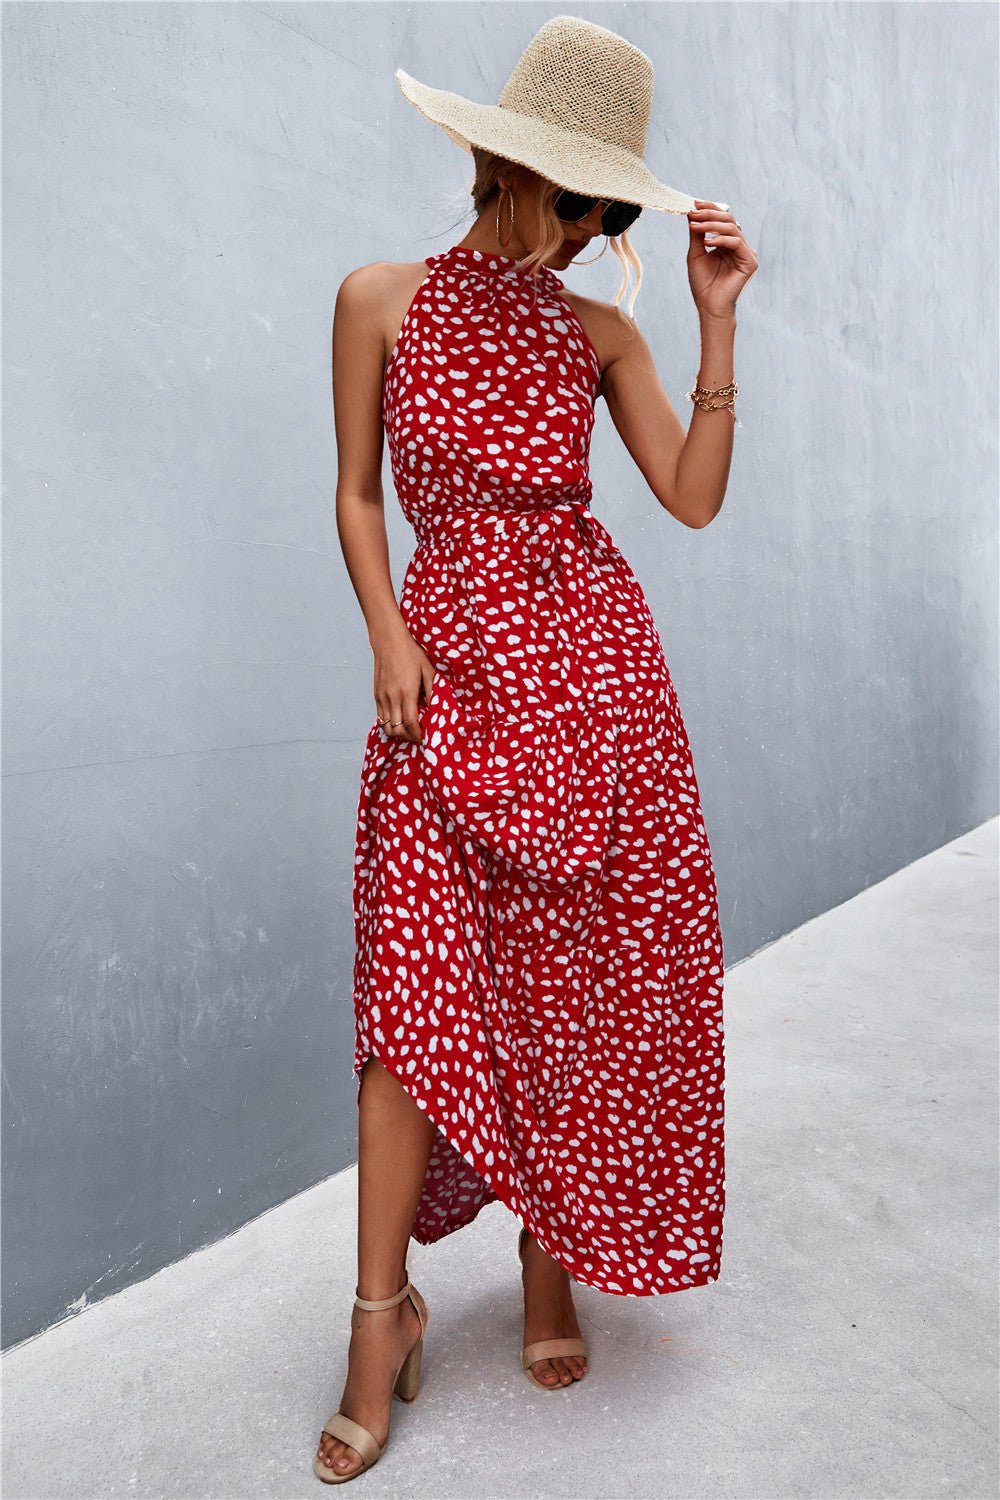 Let Me Remind You Printed Maxi Dress - red polka dot maxi dress with halter neck and tie waist. #Firefly Lane Boutique1